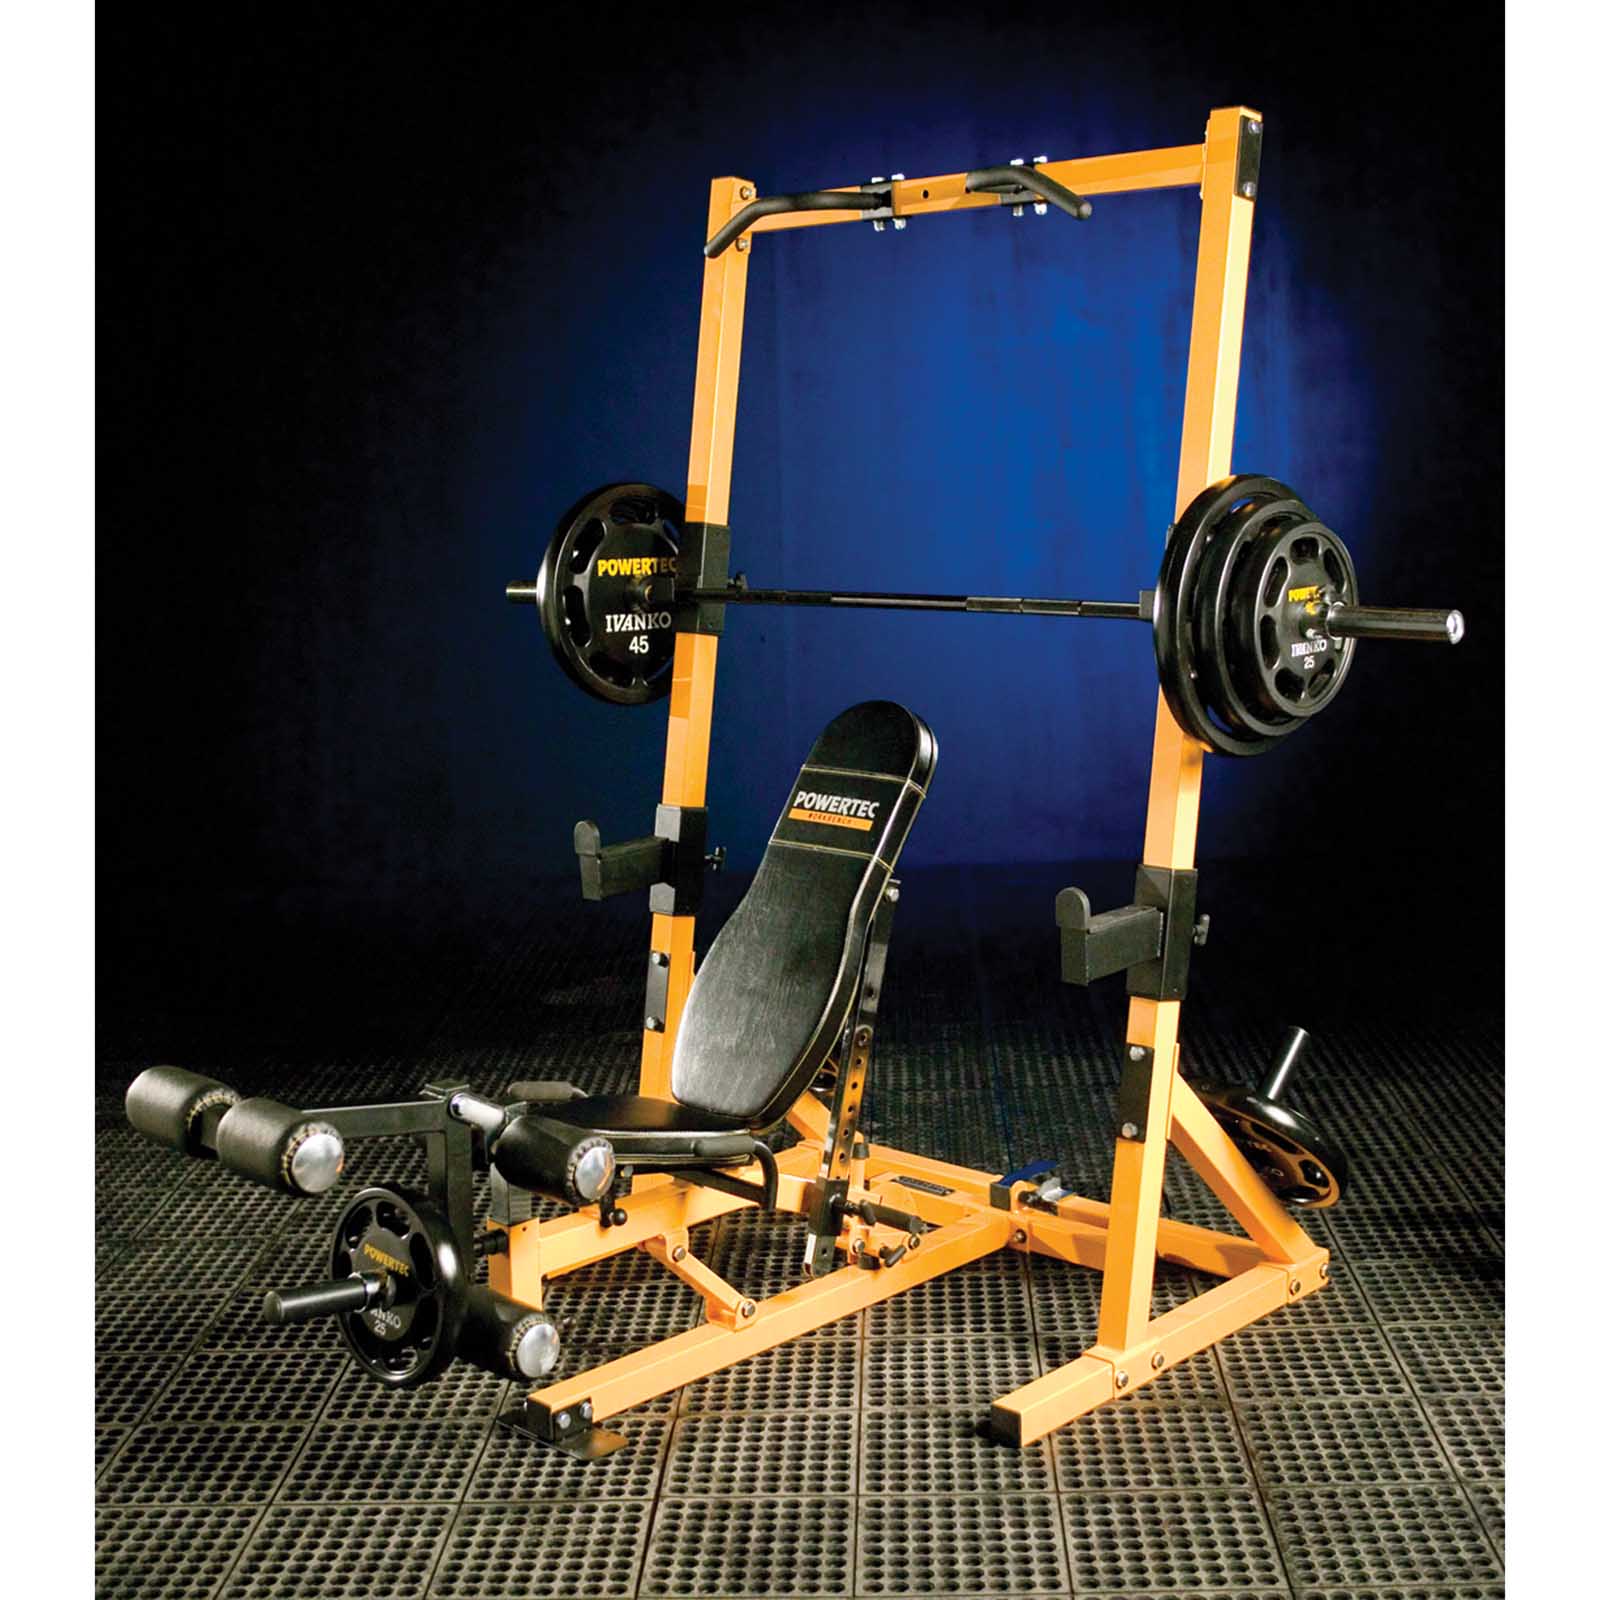 Powertec Bench Rack System with loaded barbell